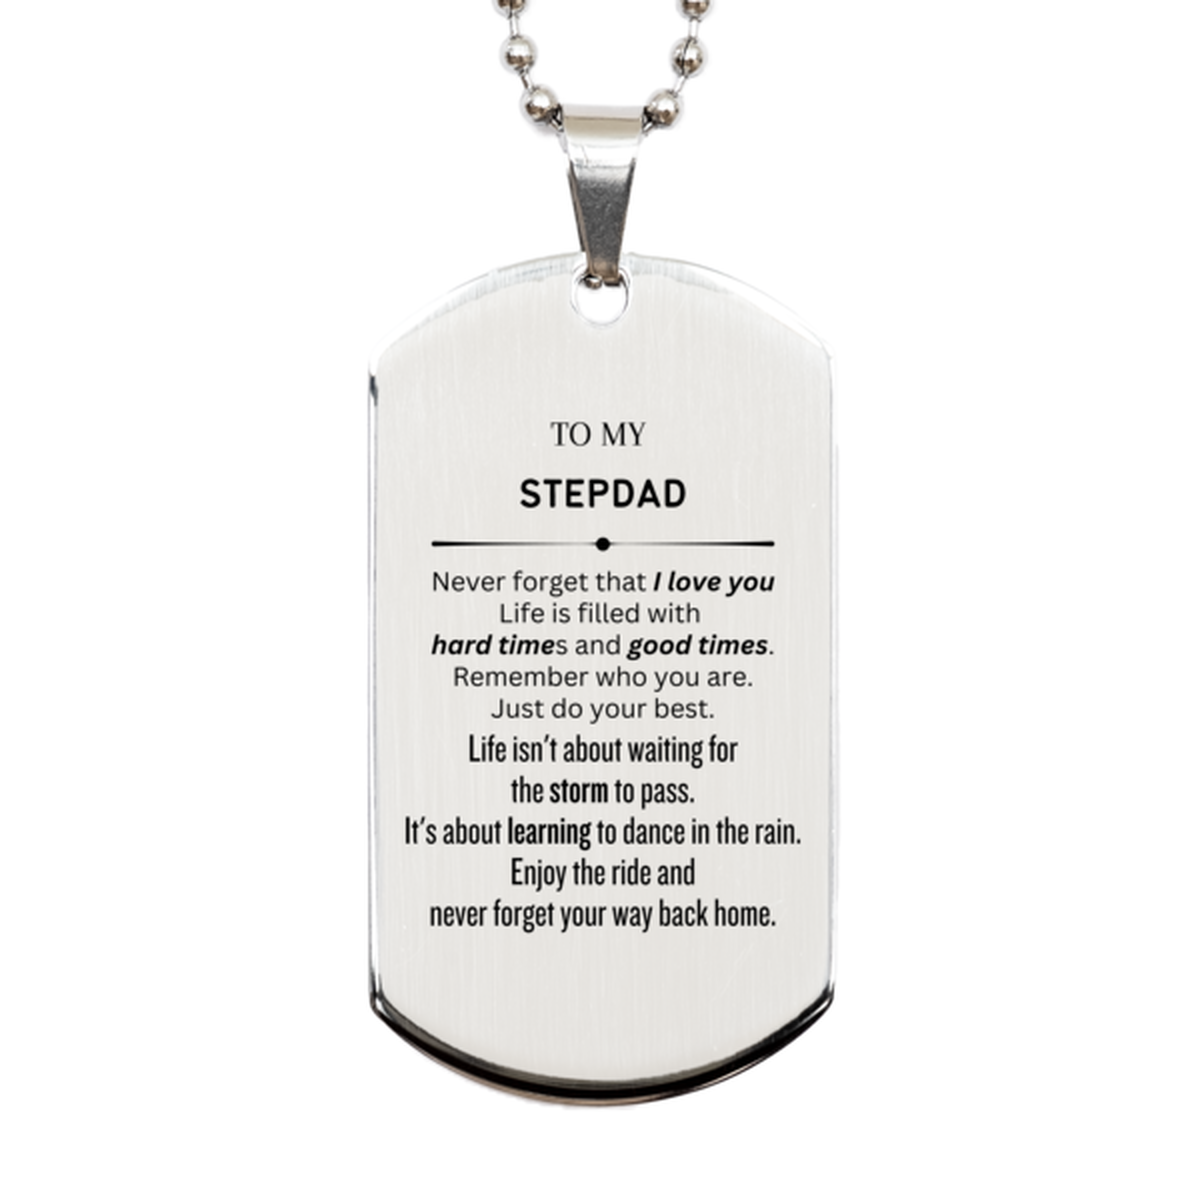 Christmas Stepdad Silver Dog Tag Gifts, To My Stepdad Birthday Thank You Gifts For Stepdad, Graduation Unique Gifts For Stepdad To My Stepdad Never forget that I love you life is filled with hard times and good times. Remember who you are. Just do your be